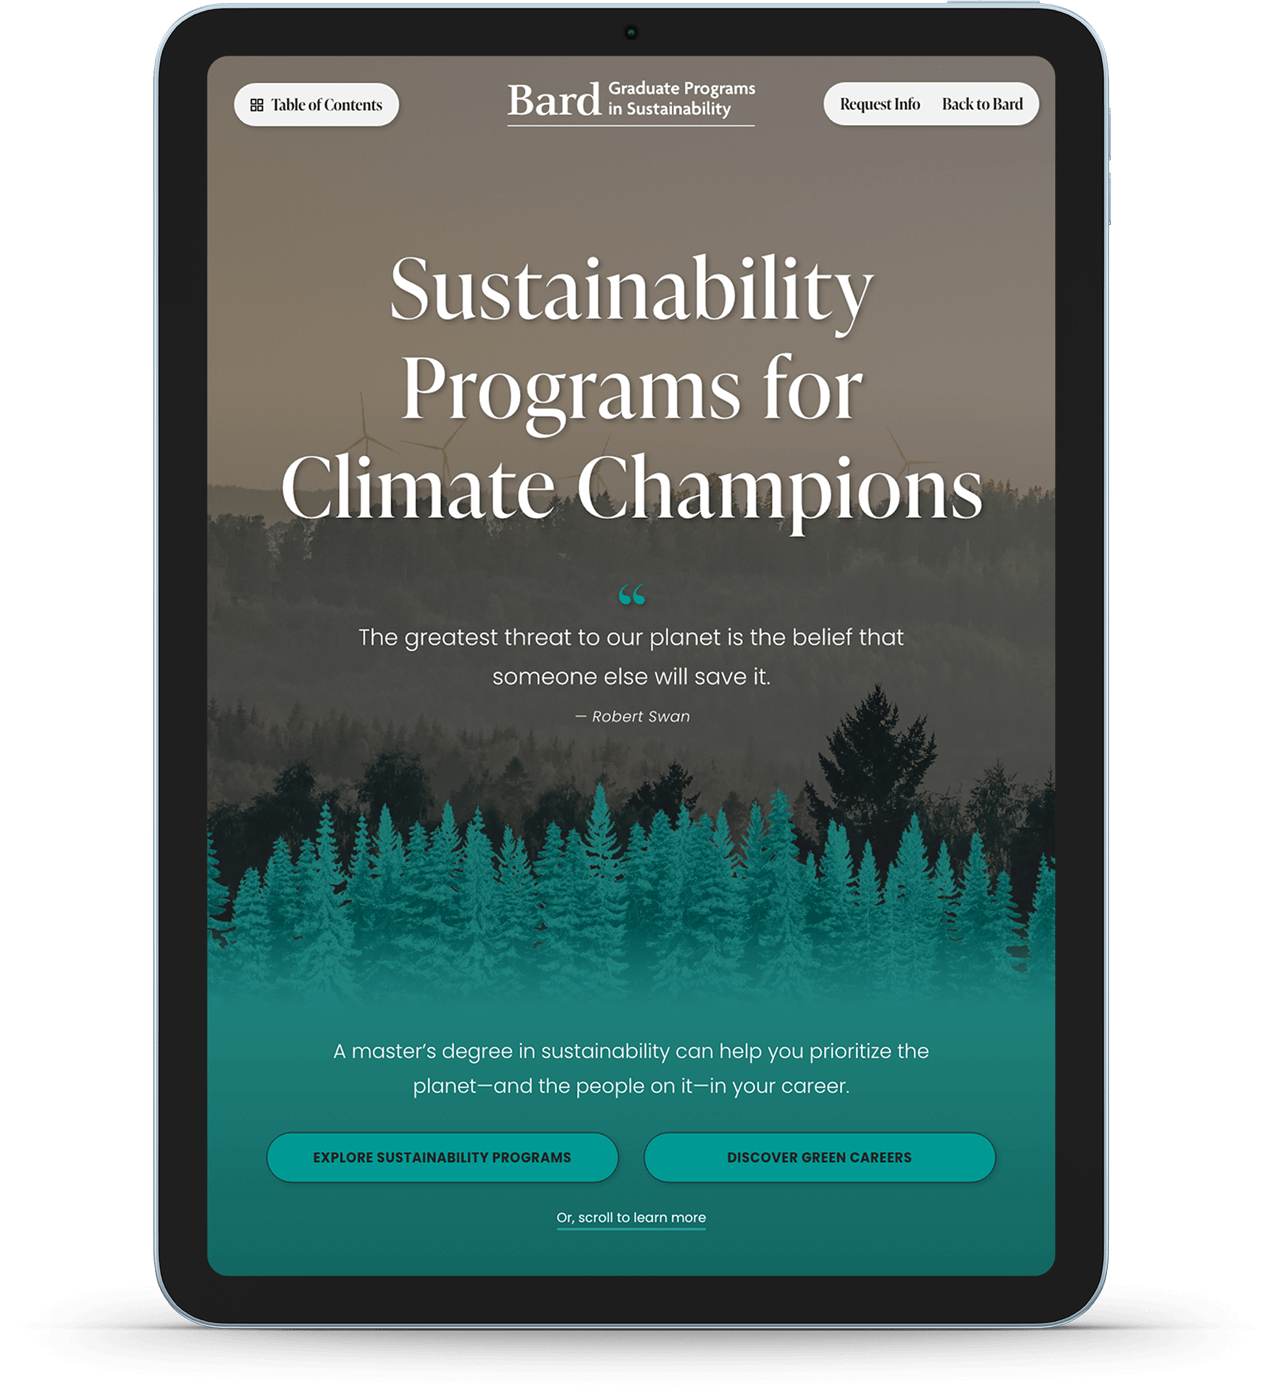 Bard-Sustainability-Programs-for-Climate-Champions-Pillar-Page-Tablet-Mockup